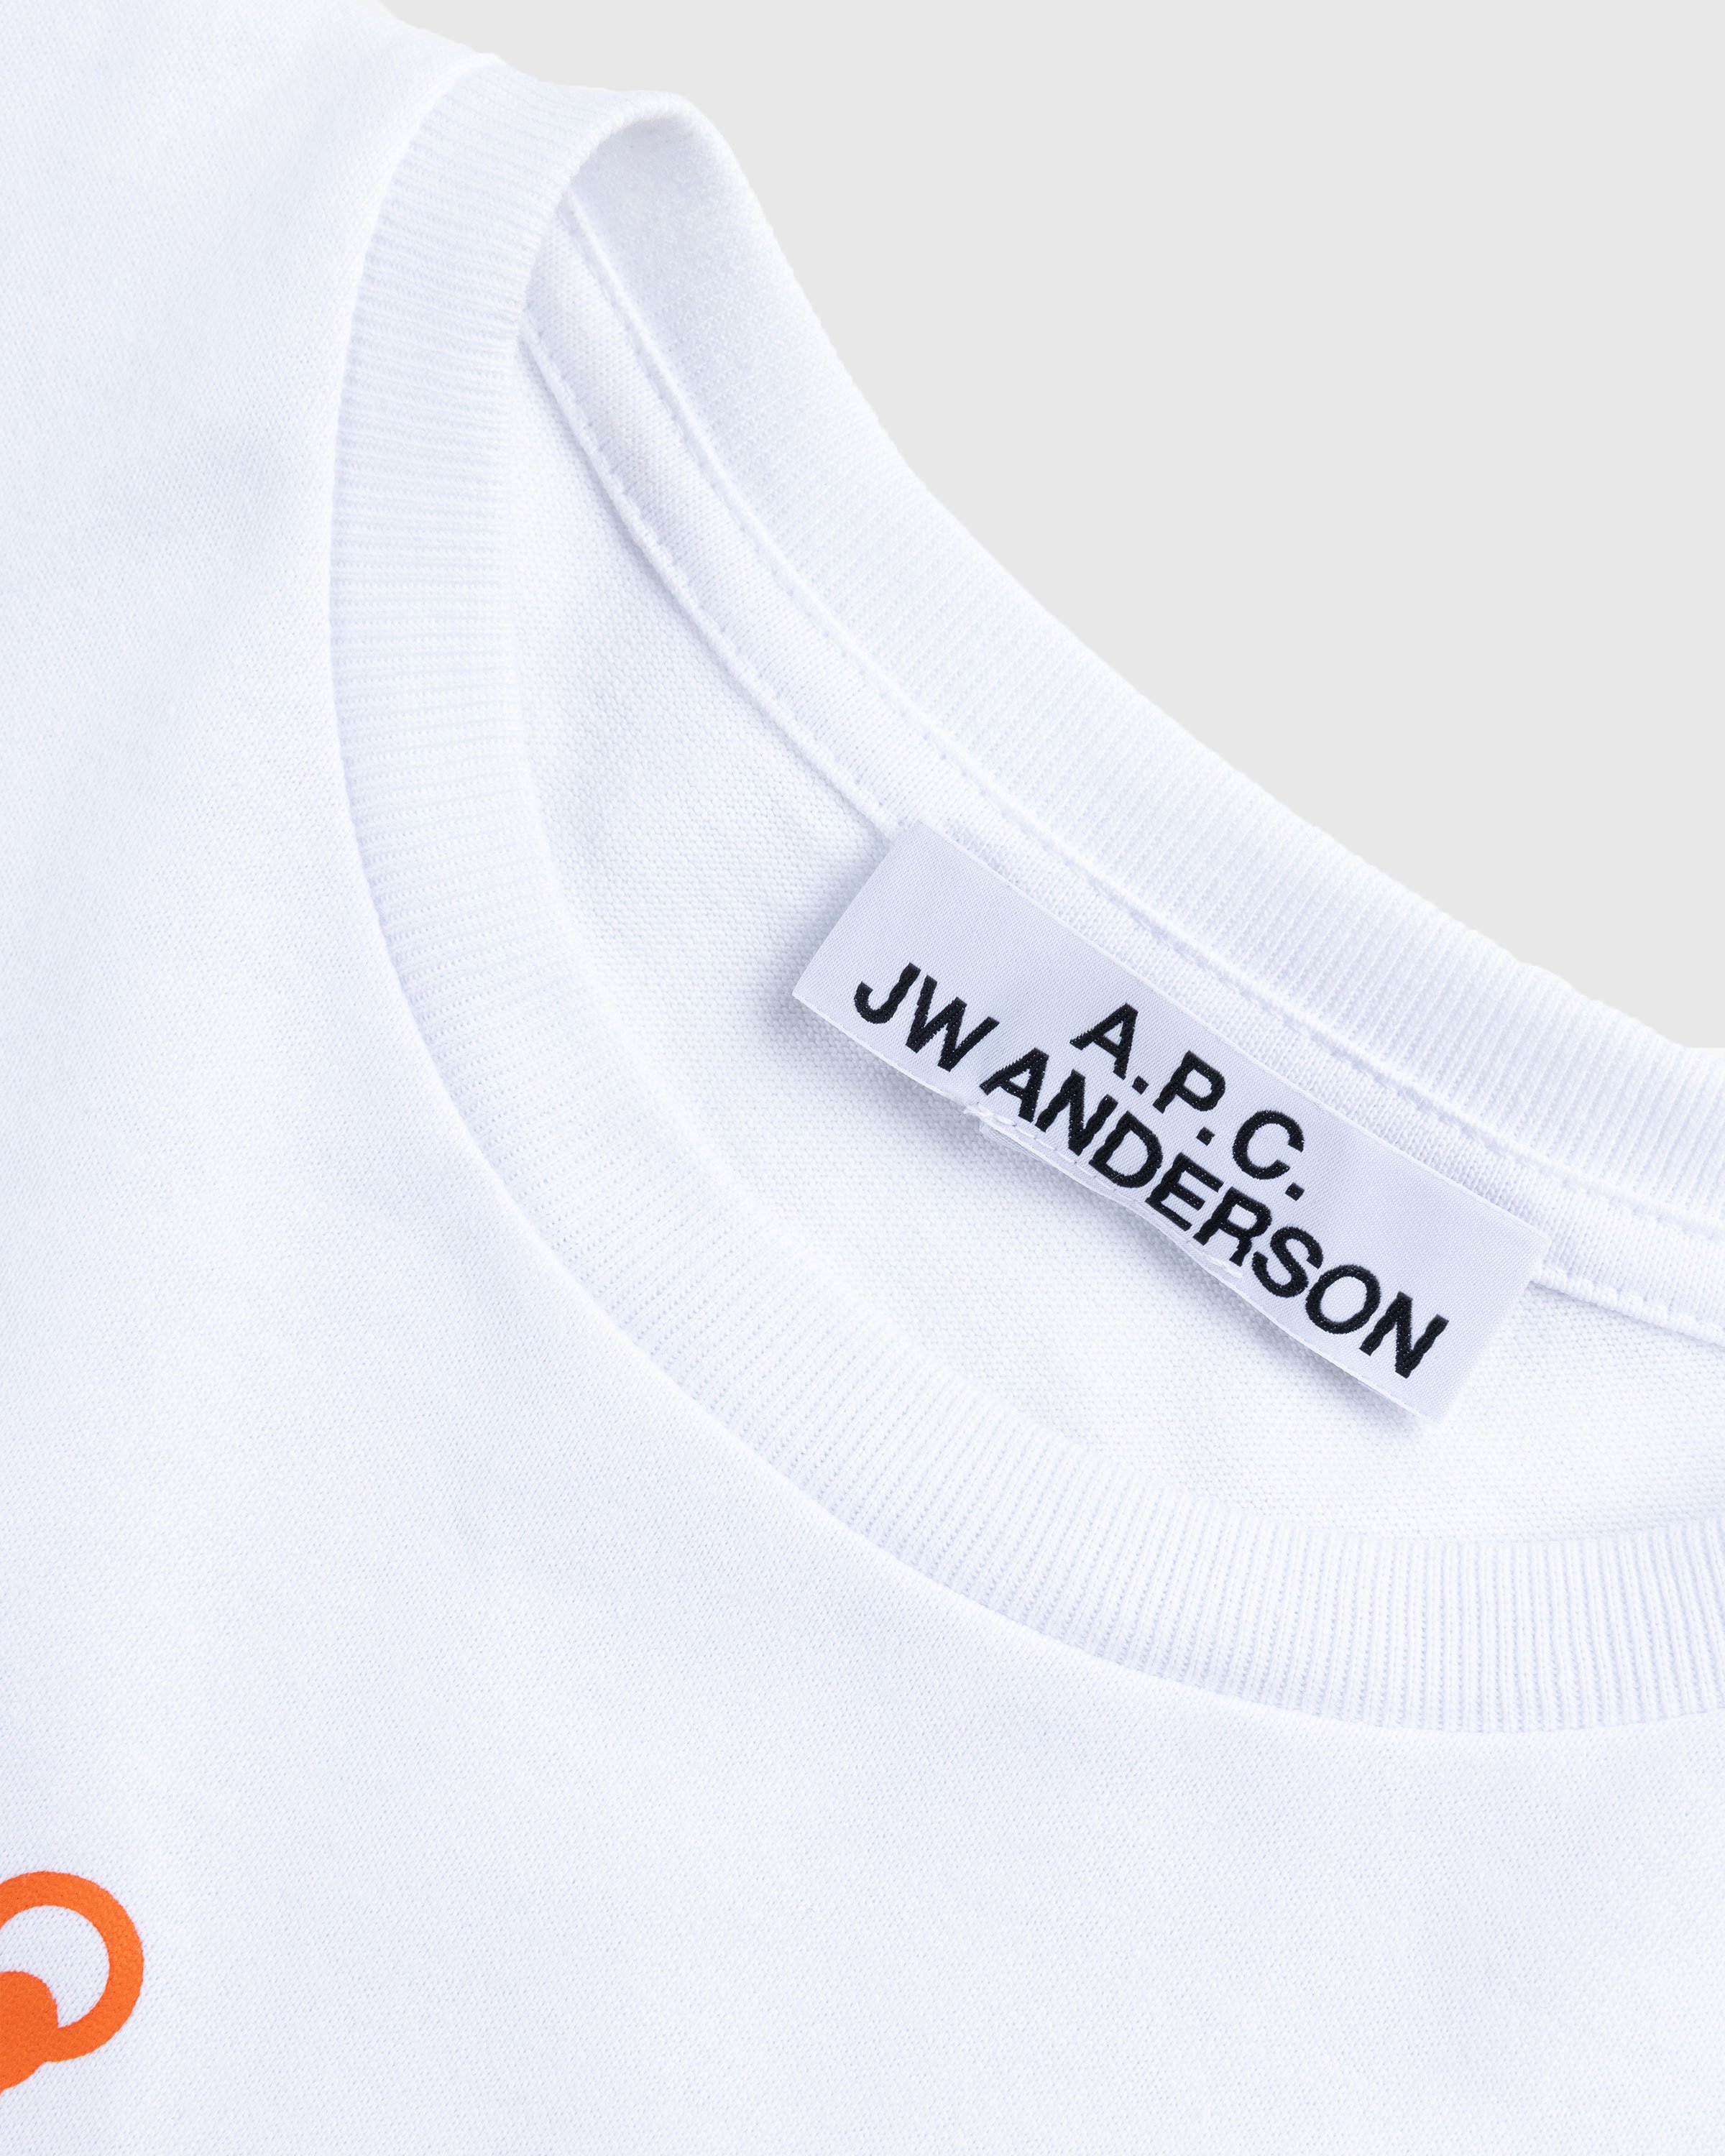 A.P.C. x J.W. Anderson - Anchor T-Shirt White - Clothing - White - Image 5